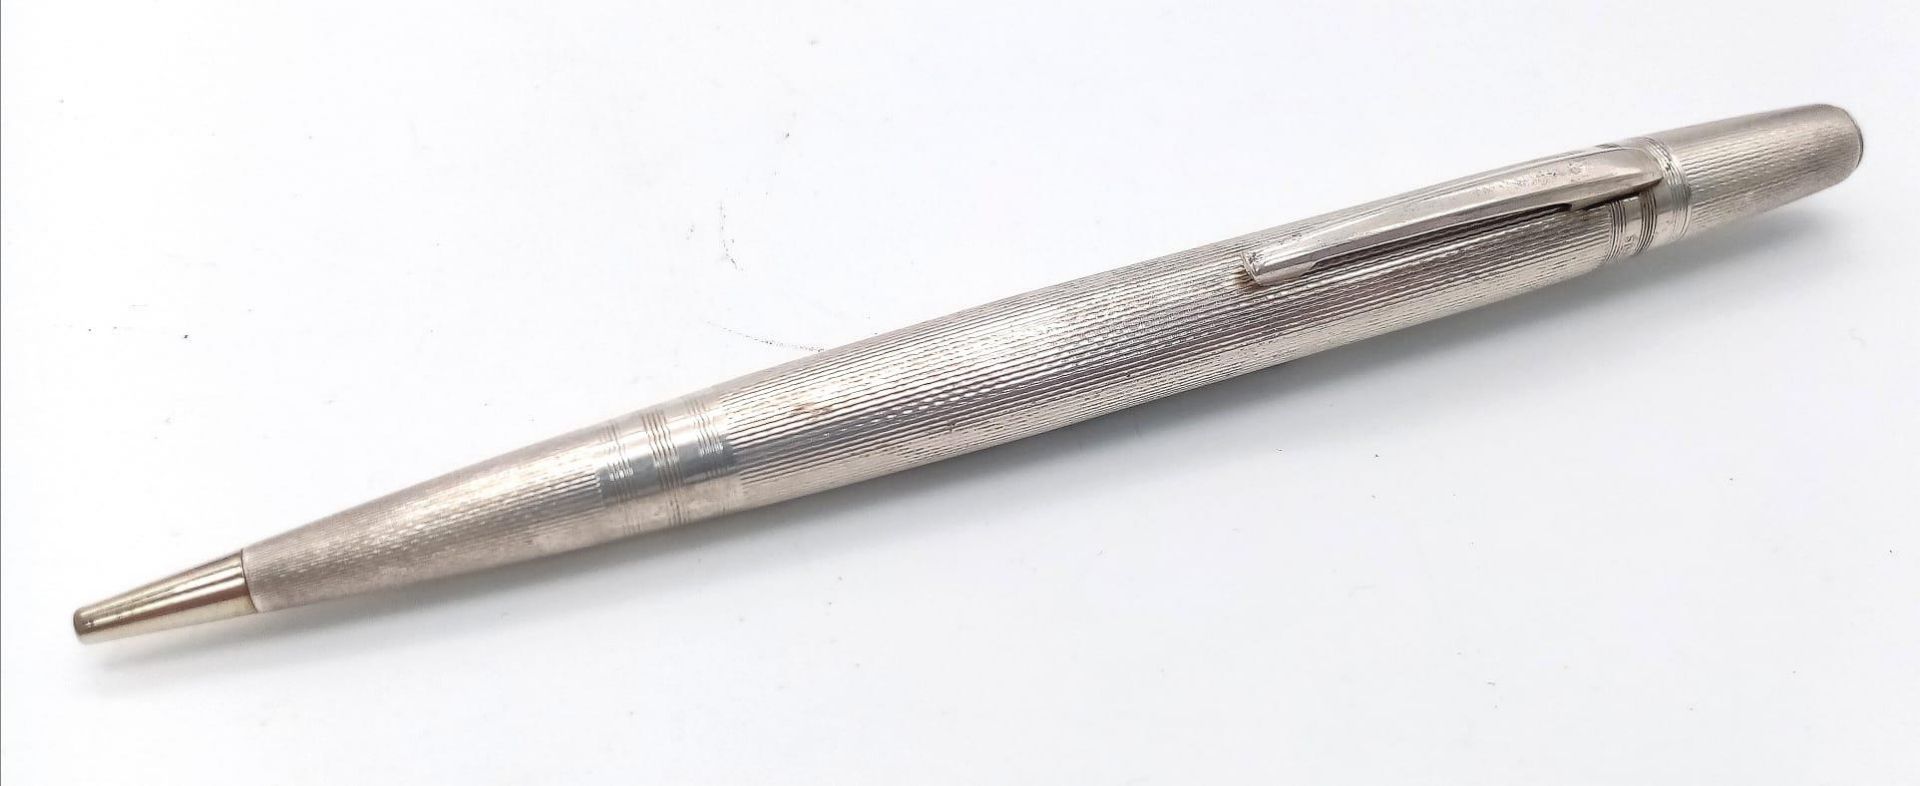 A Vintage Life Long Sterling Silver Propelling Pencil. Comes in original packaging. 20g